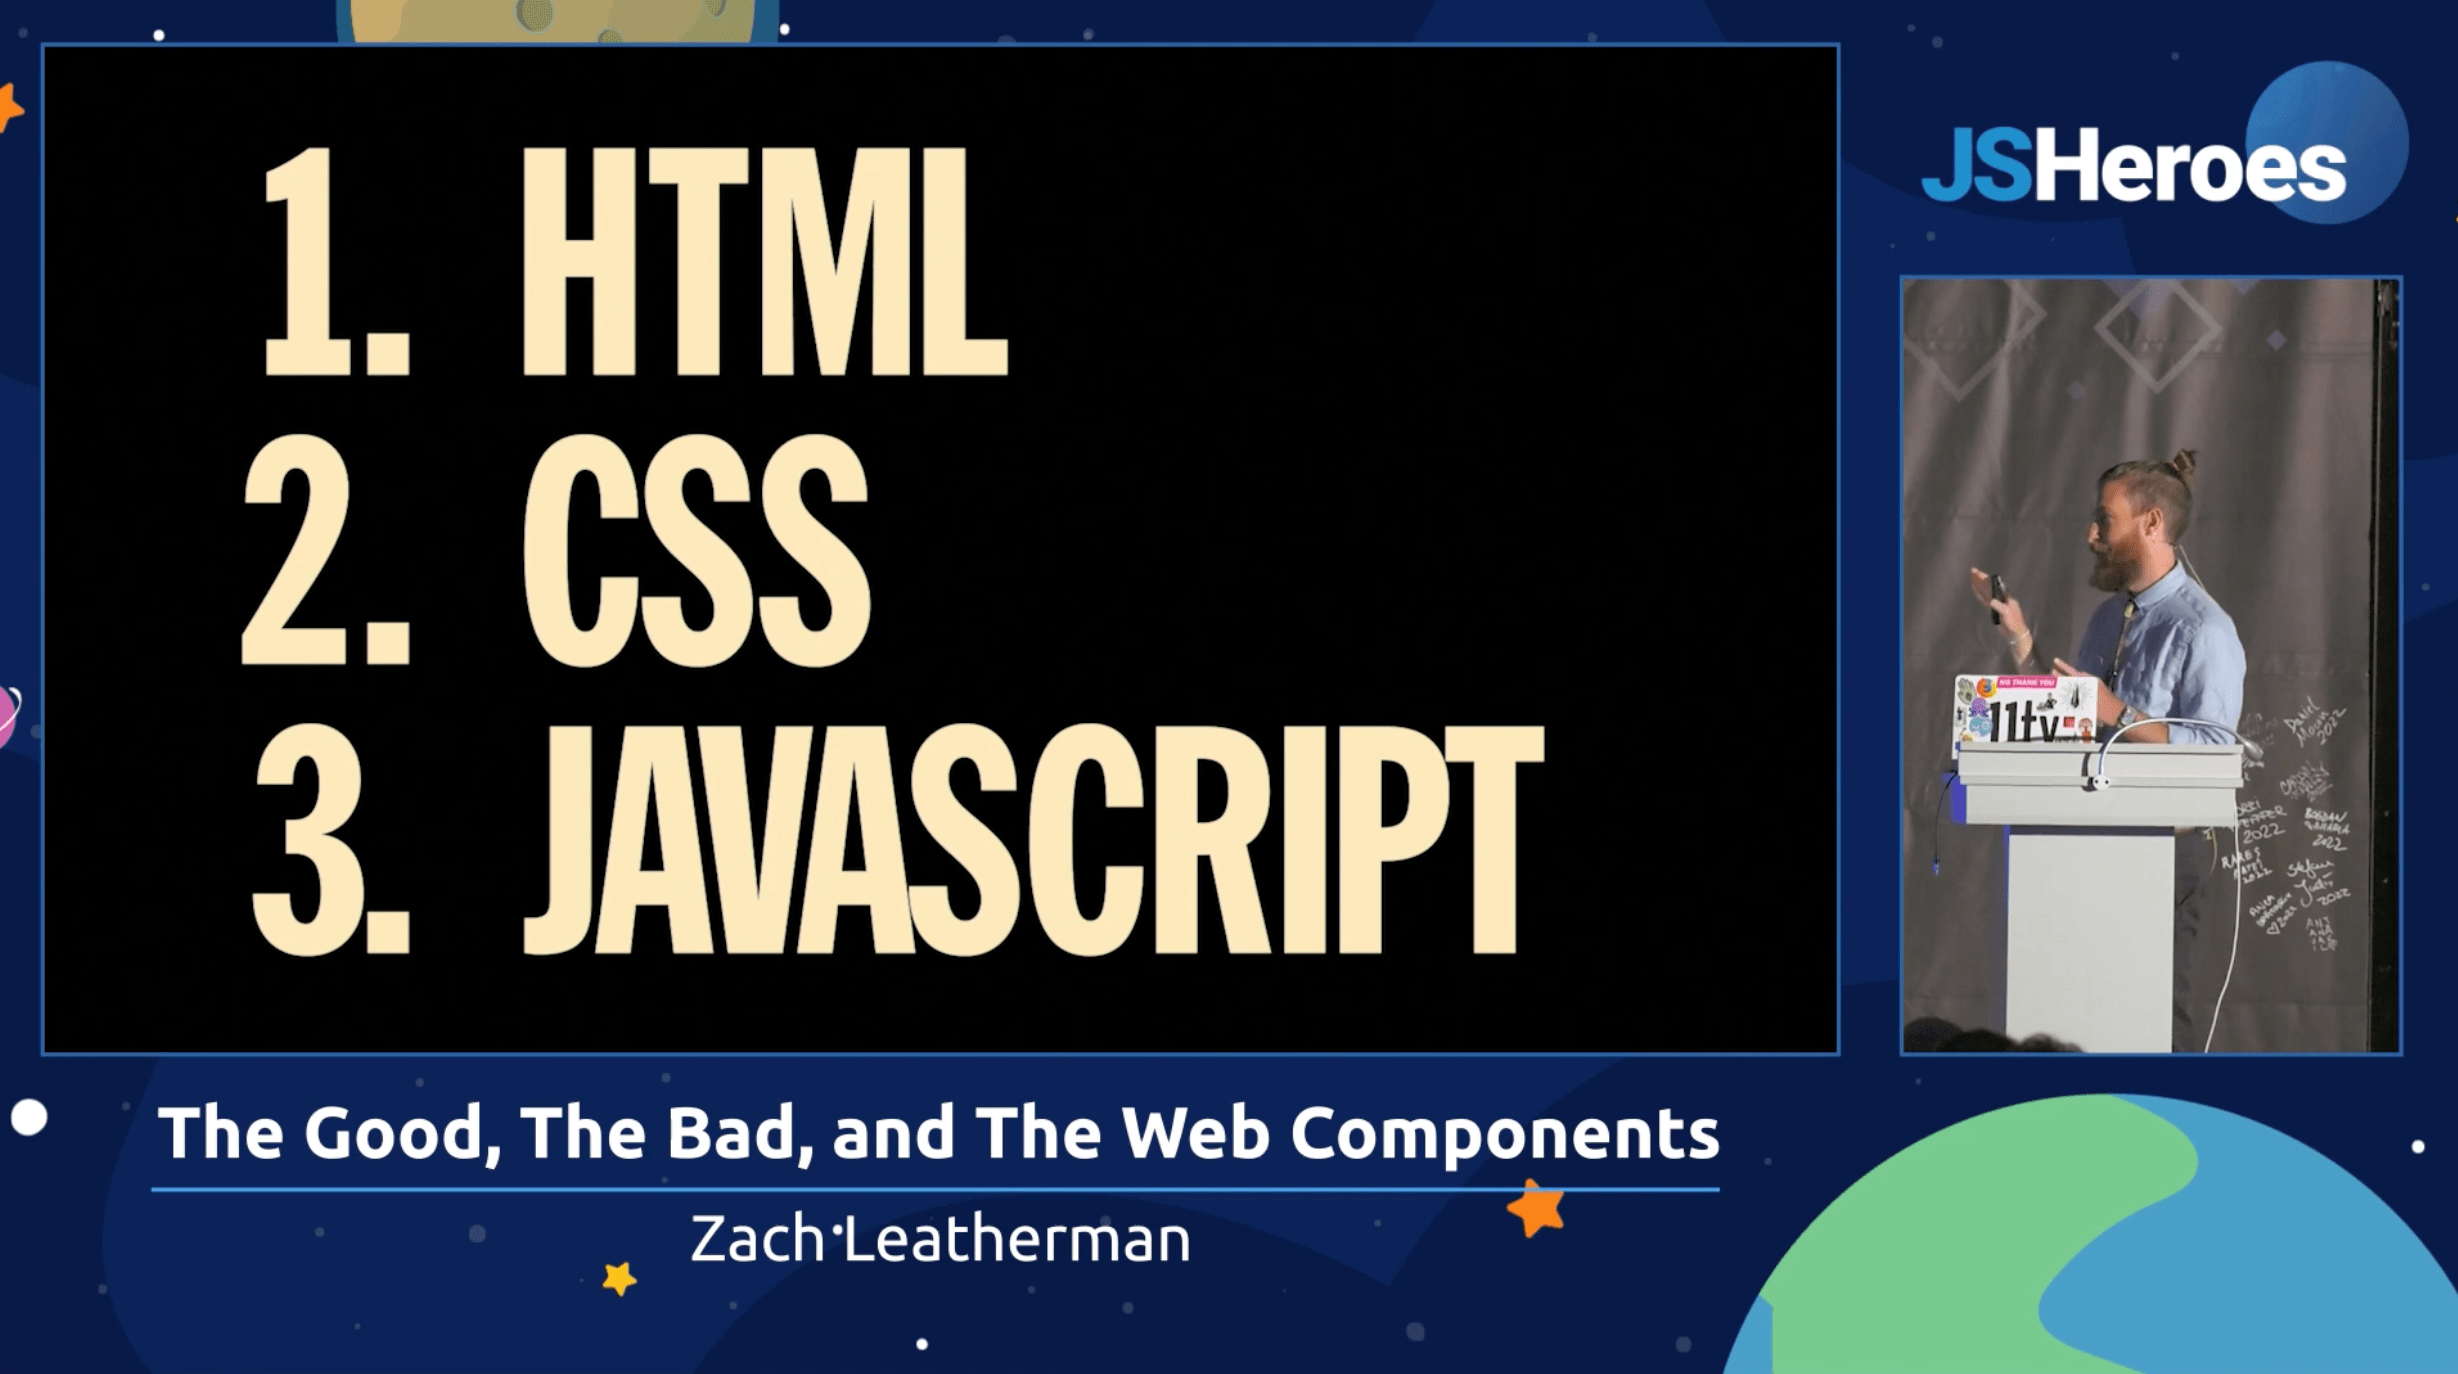 Screenshot of the recording from Zach Leatherman’s talk at JSHeroes 2023 showing Zach pointing at his slides with the big words “1. HTML, 2. CSS, 3. JavaScript on it.”